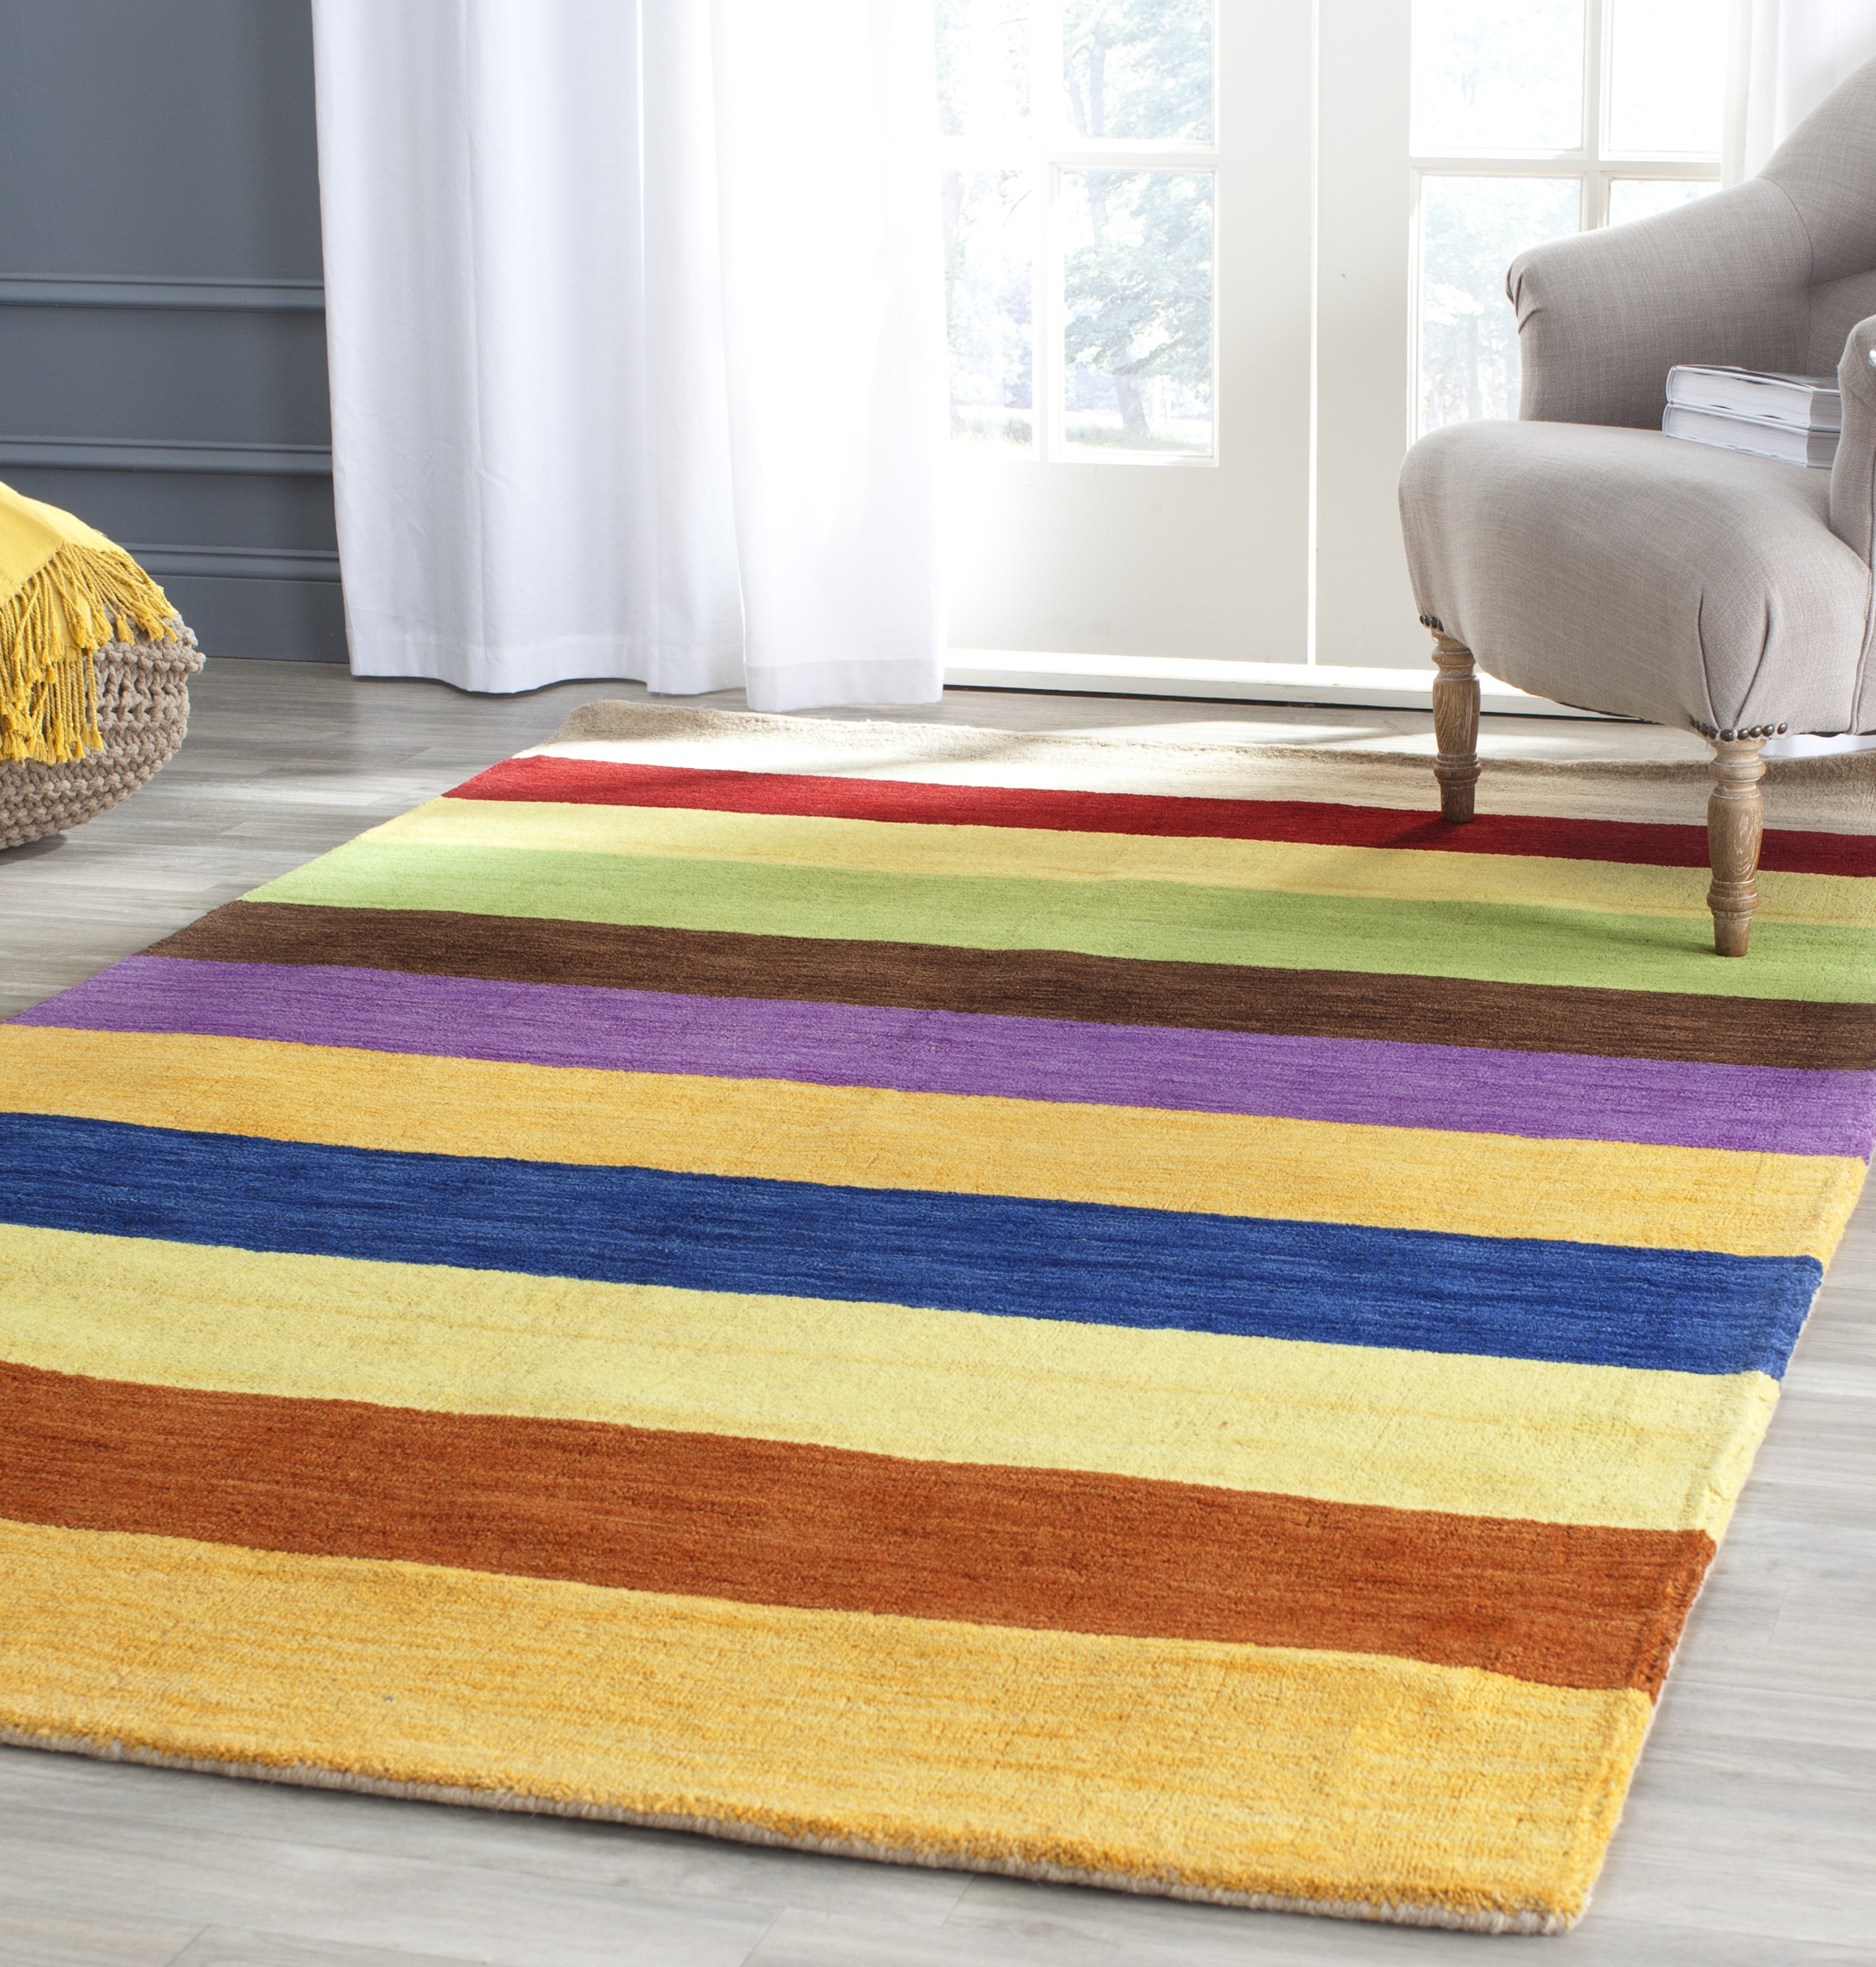 Arlo Home Hand Loomed Area Rug, HIM584A, Yellow/Multi,  4' X 6' - Image 1